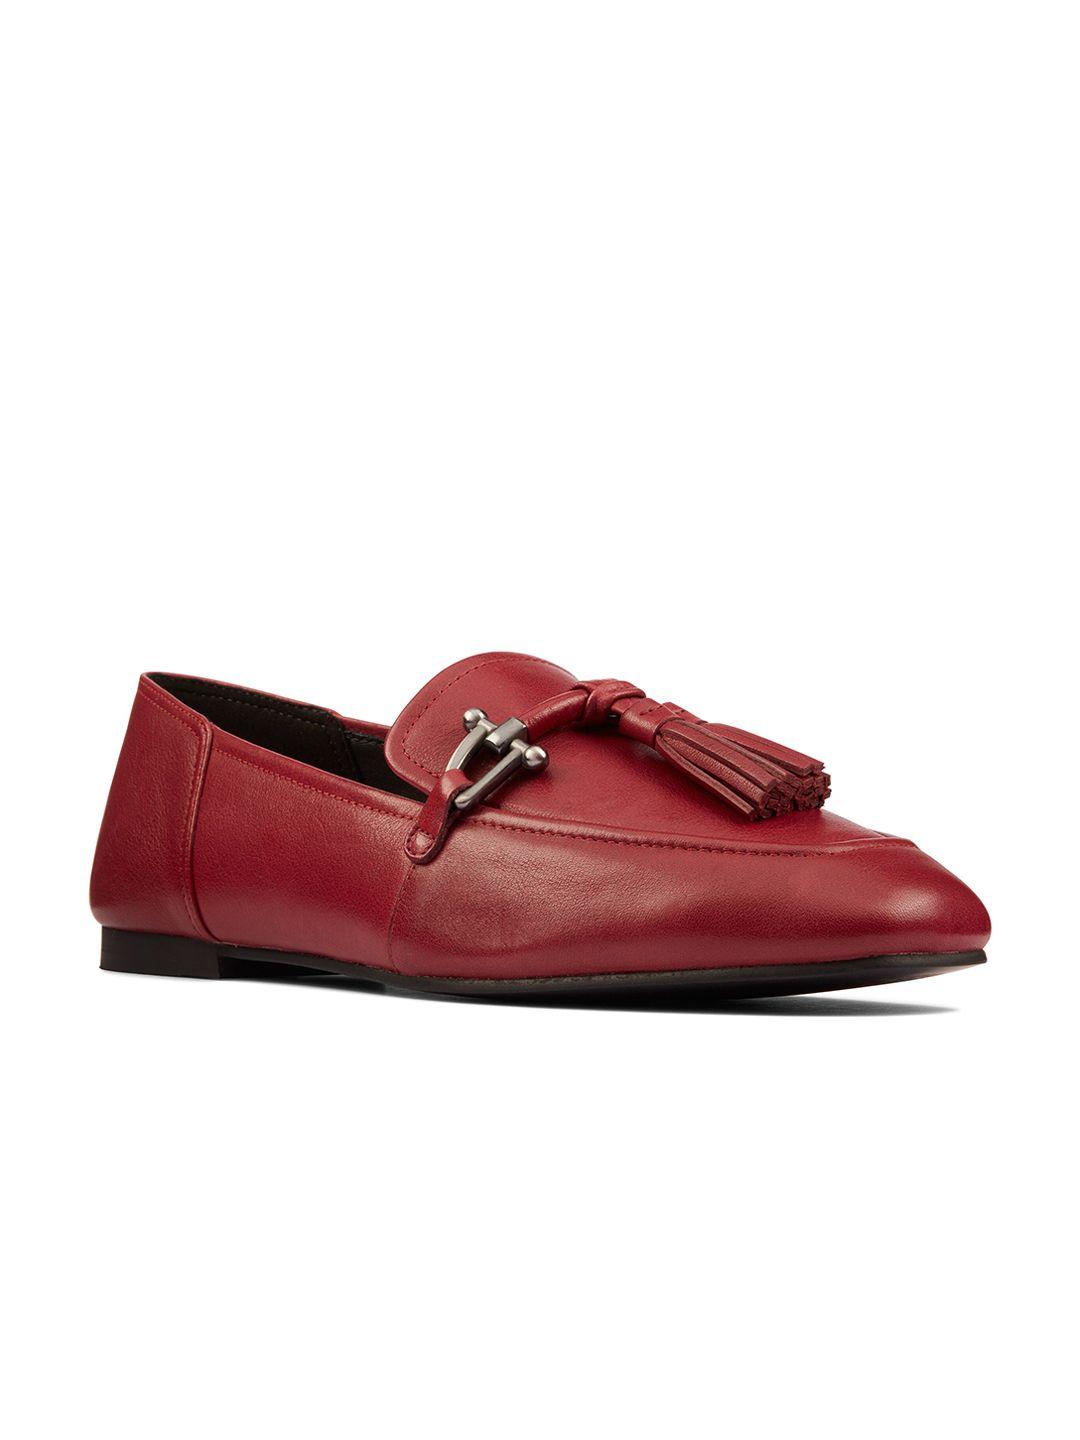 clarks-women-red-printed-leather-loafers